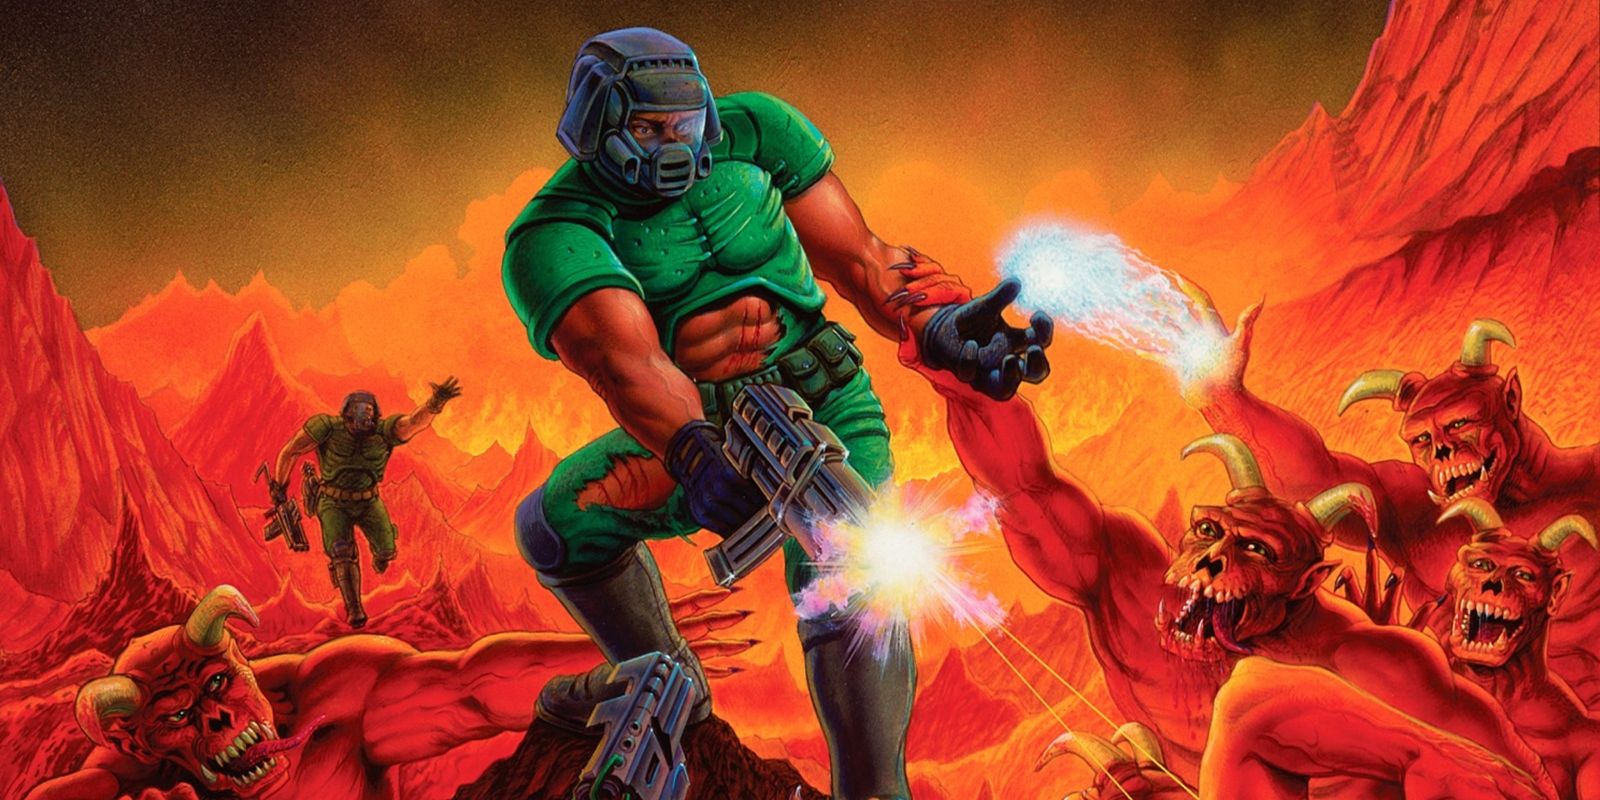 A solider fires in art from the Doom video game